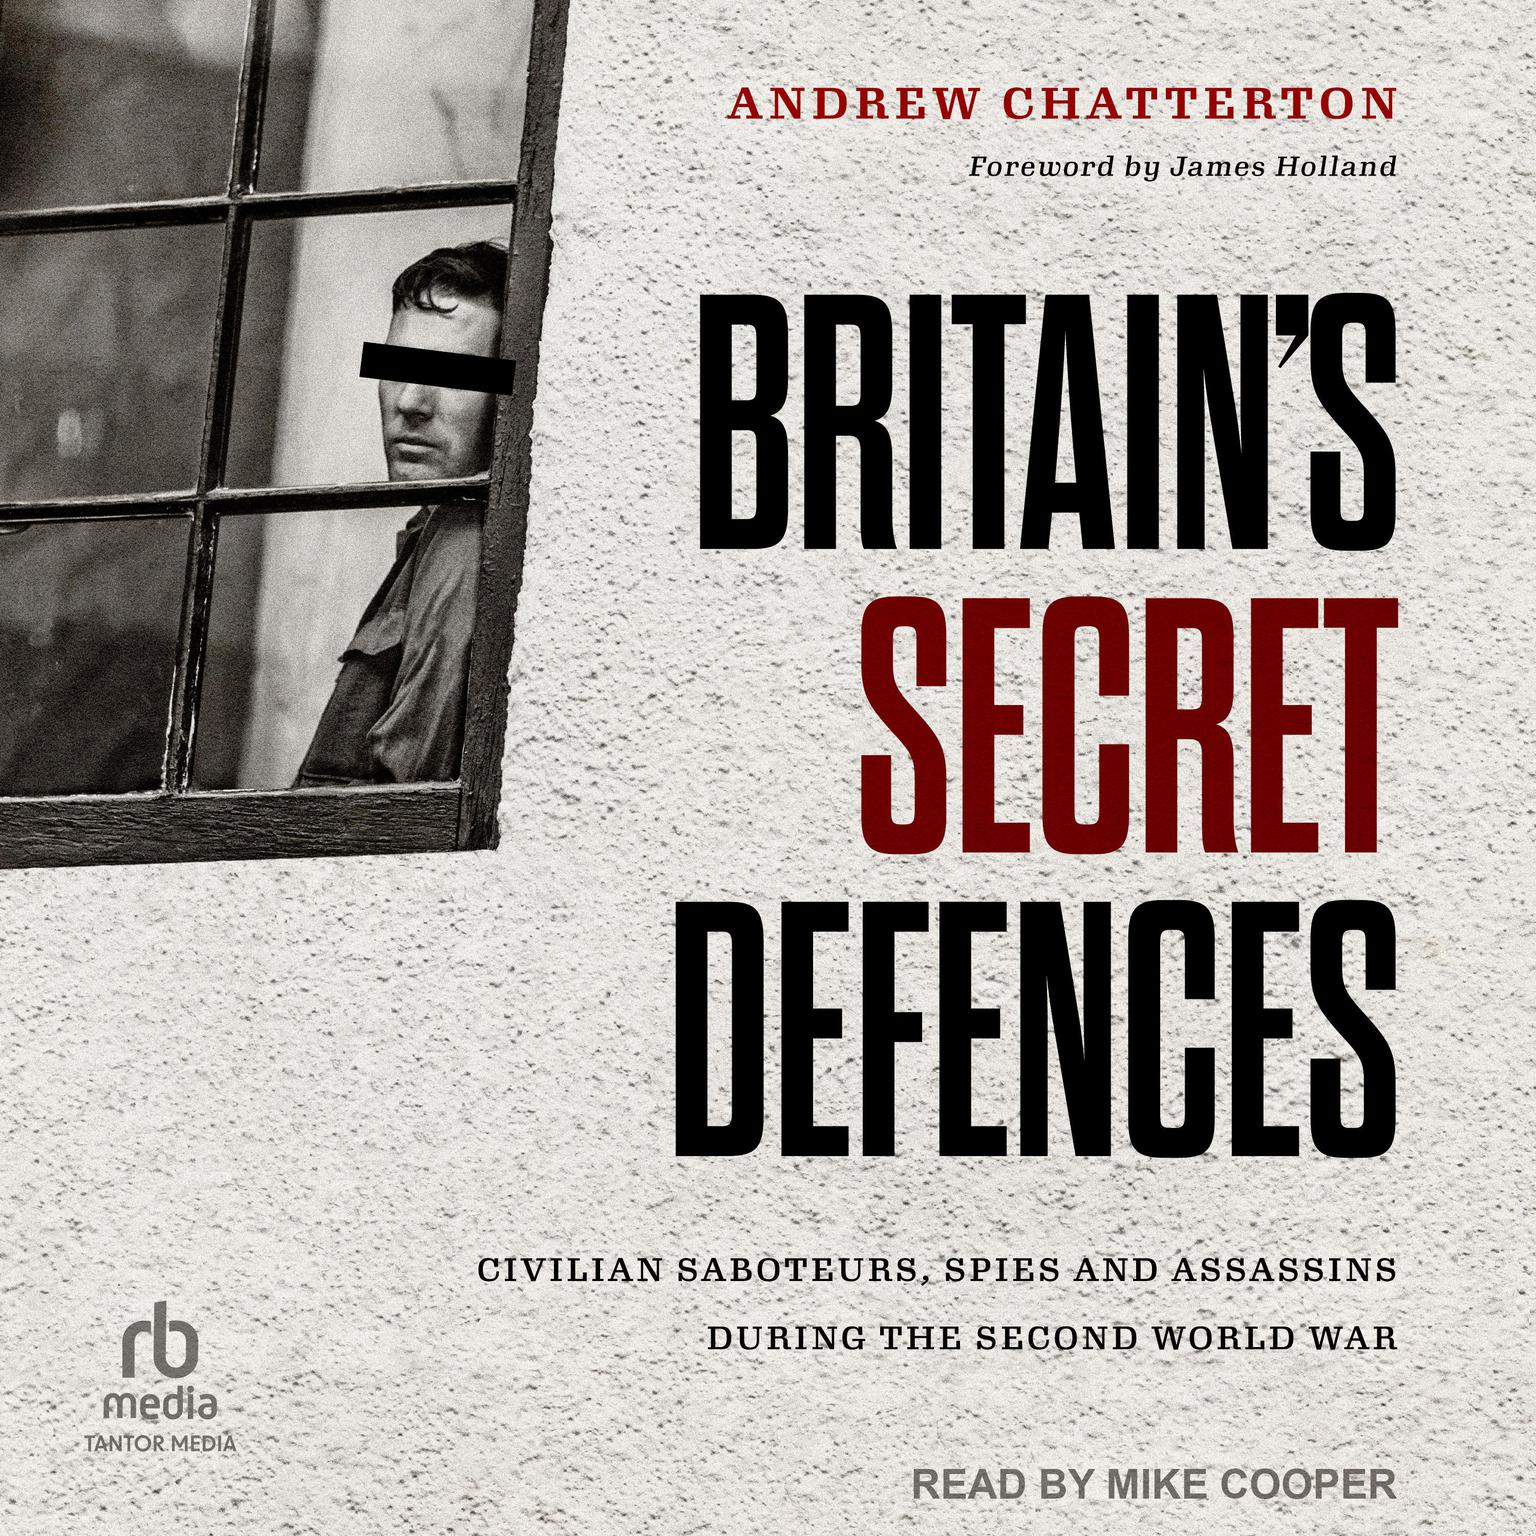 Britains Secret Defences: Civilian Saboteurs, Spies and Assassins During the Second World War Audiobook, by Andrew Chatterton